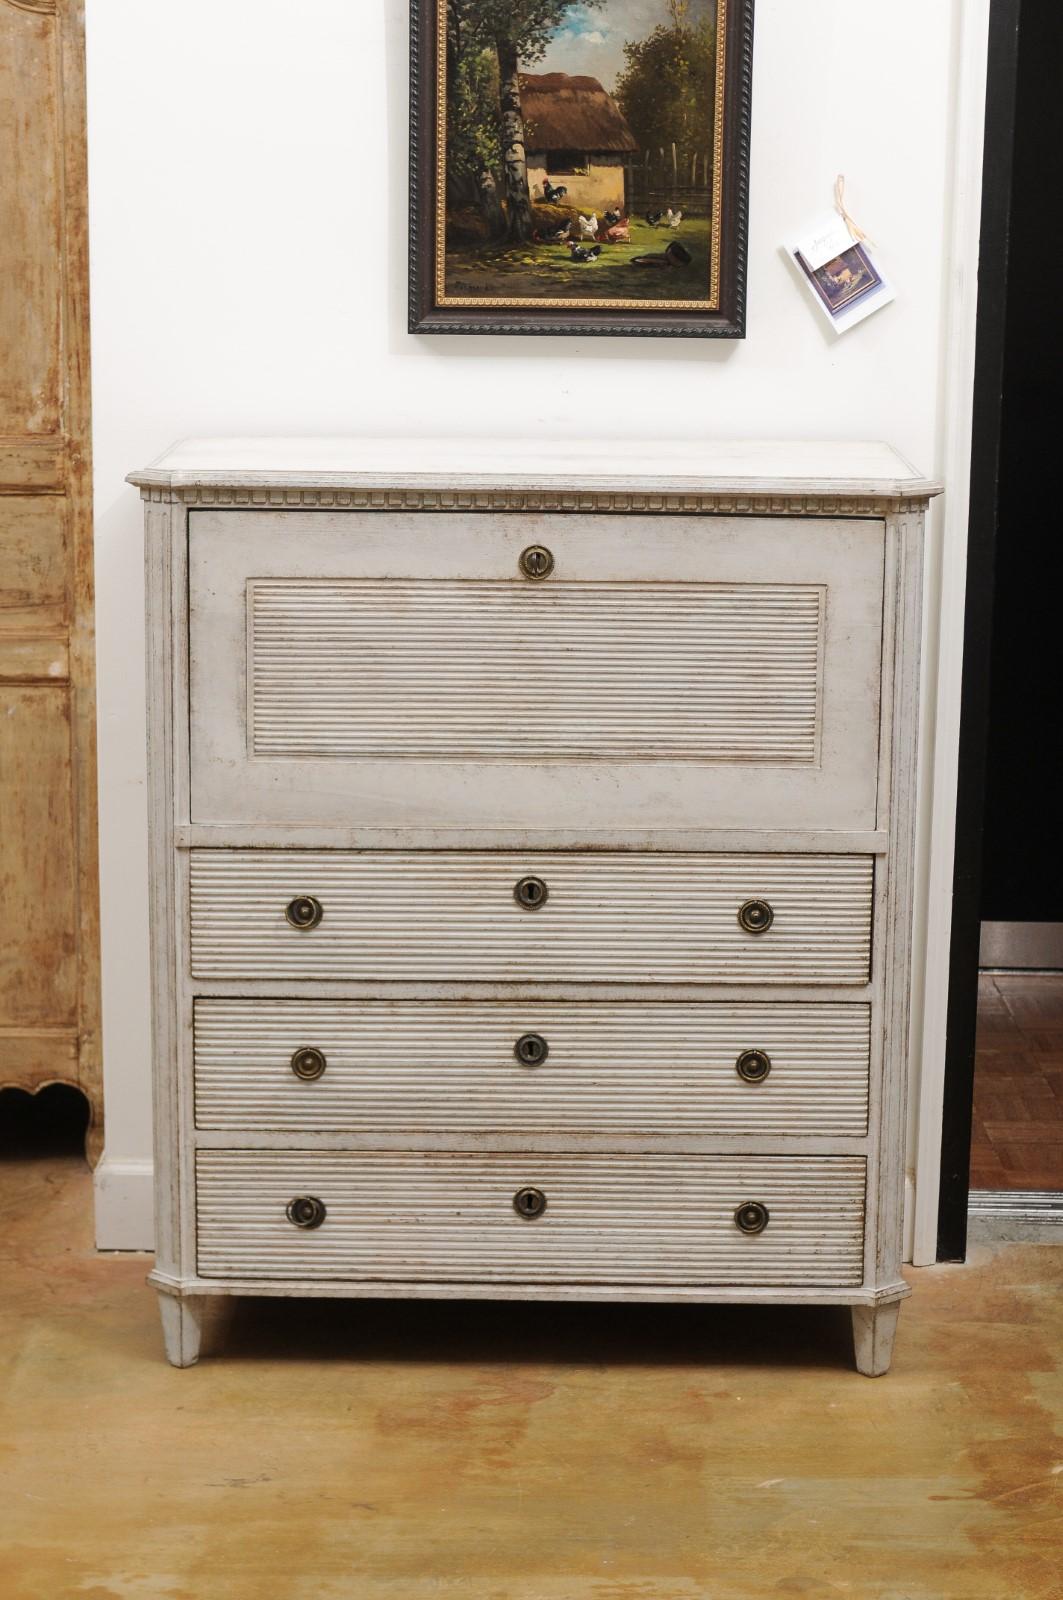 A Swedish Gustavian style painted wood drop-front secretary from the 19th century, with dentil molding, reeded accents and multiple drawers. Born in Sweden during the 19th century, this exquisite painted Gustavian style secretary features a